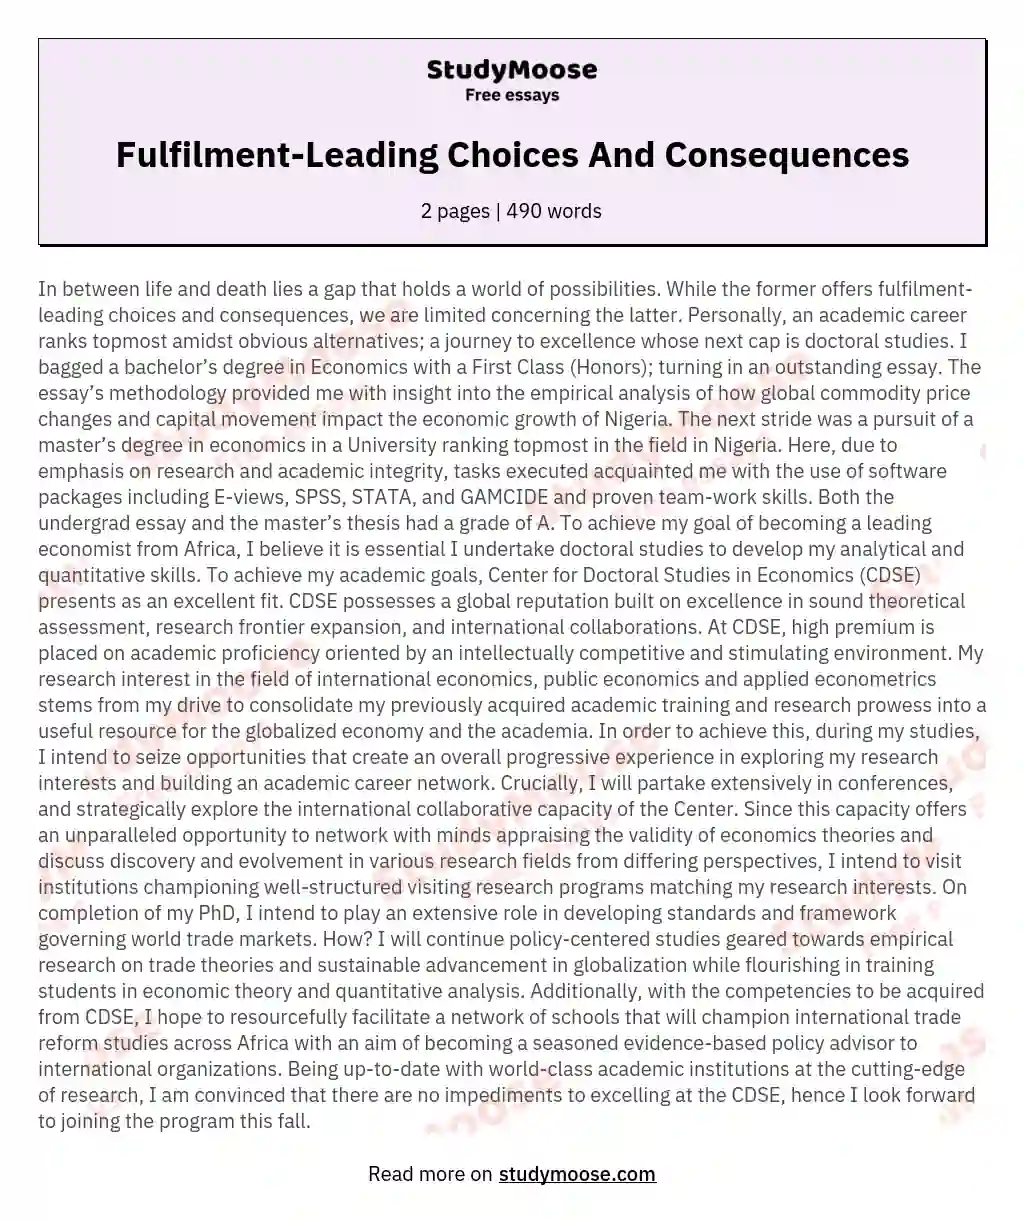 Fulfilment-Leading Choices And Consequences essay